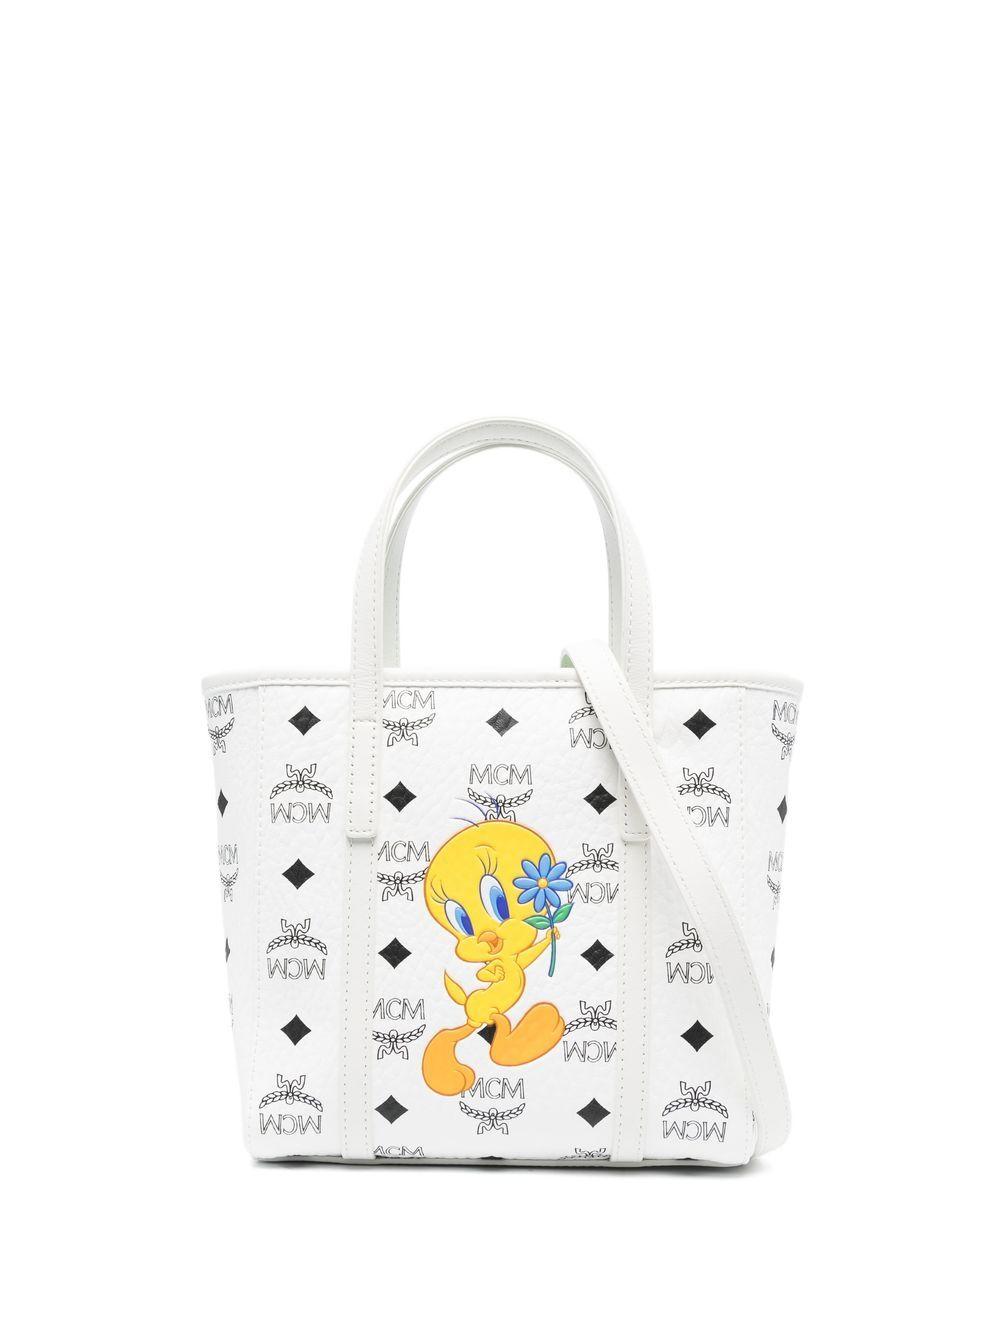 MCM Tote Bags for Men - Shop Now on FARFETCH